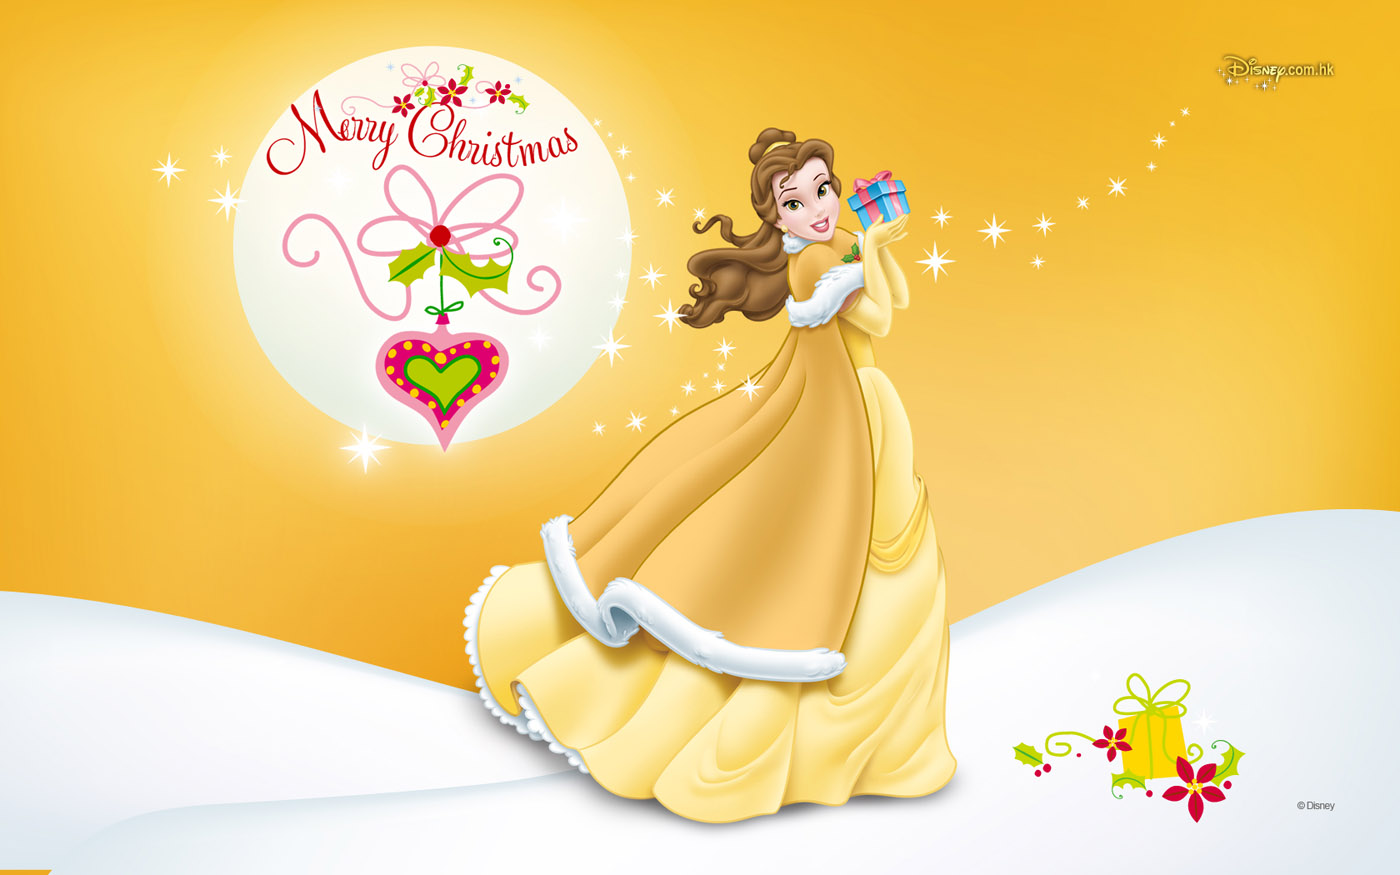 Disney Princess - Beauty And The Beast Belle Background - HD Wallpaper 